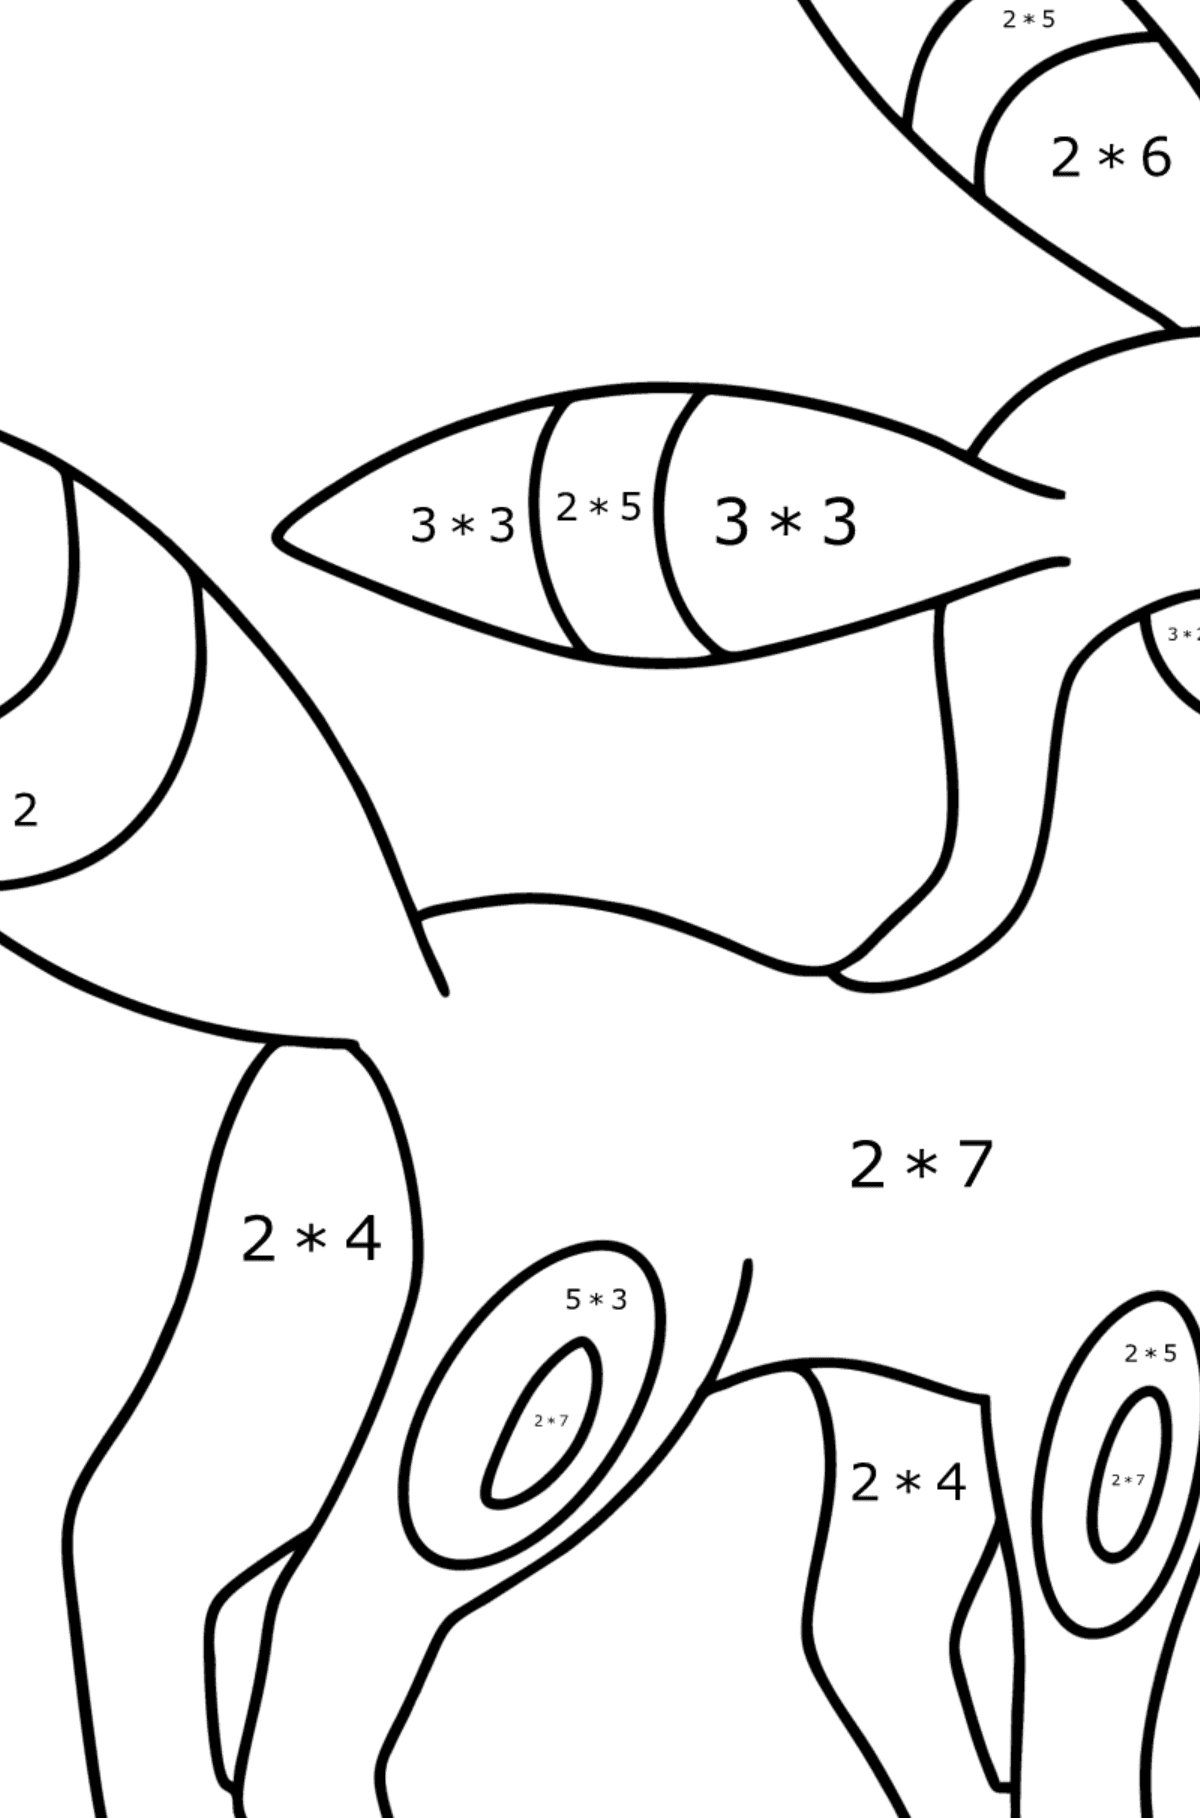 Coloring page Pokemon Go Umbreon - Math Coloring - Multiplication for Kids